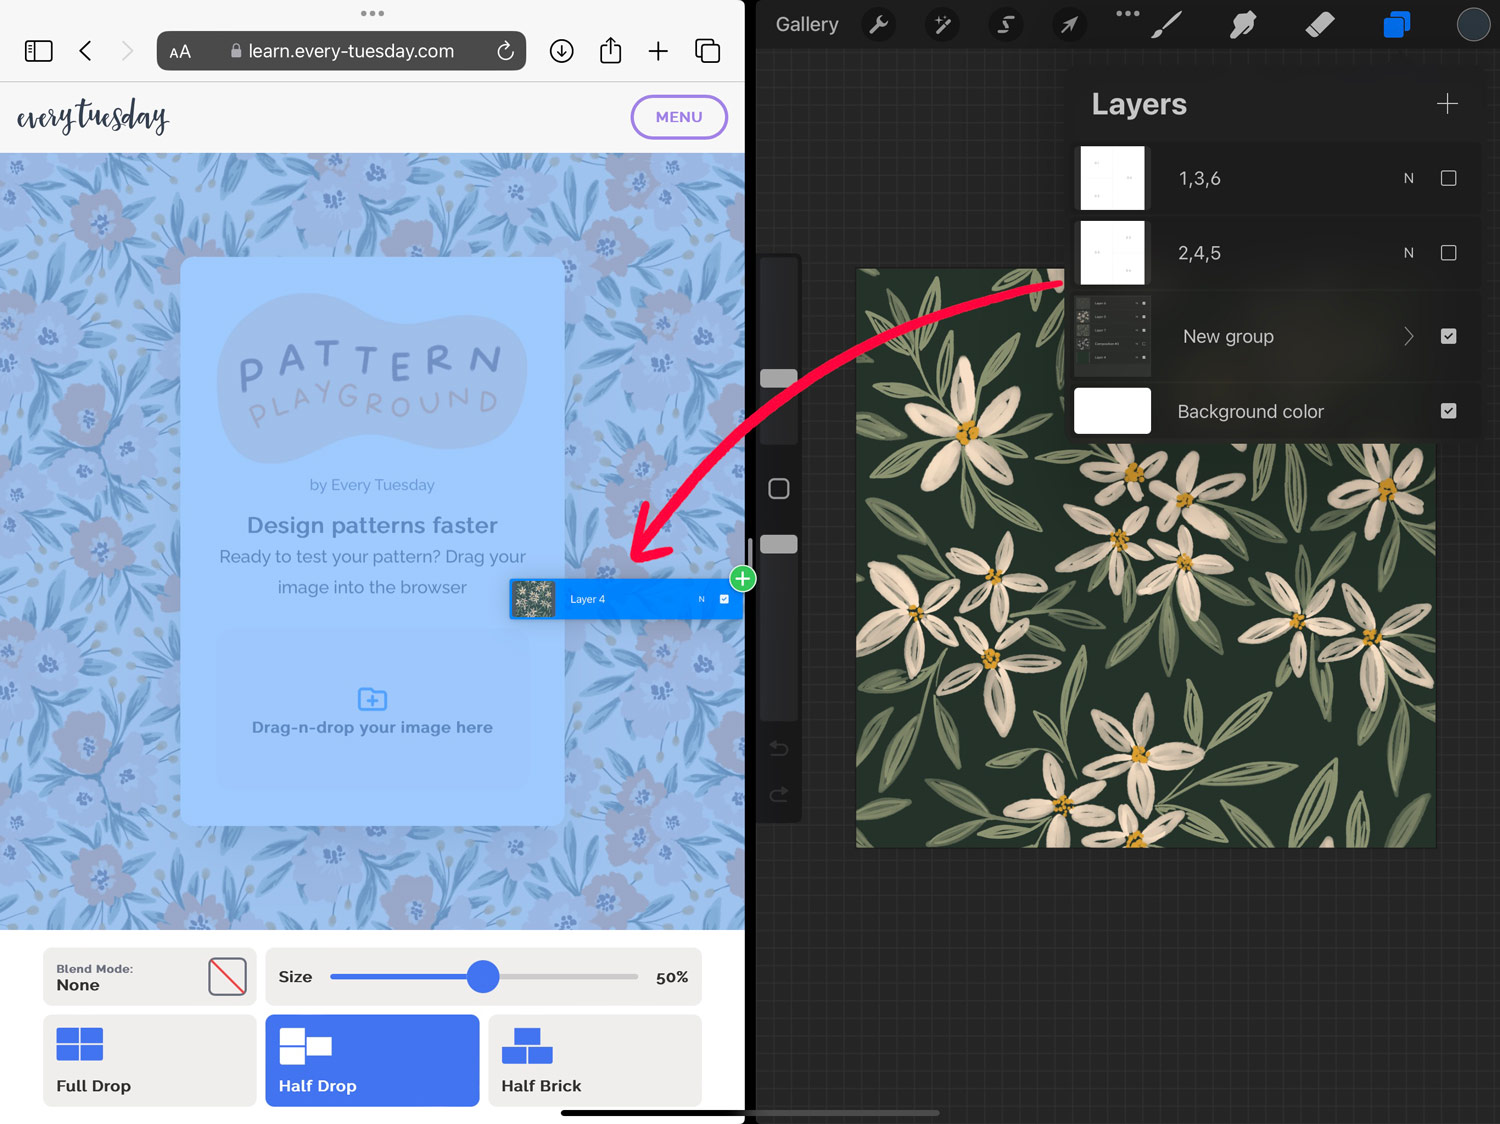 Dragging the layer into the Pattern Playground app